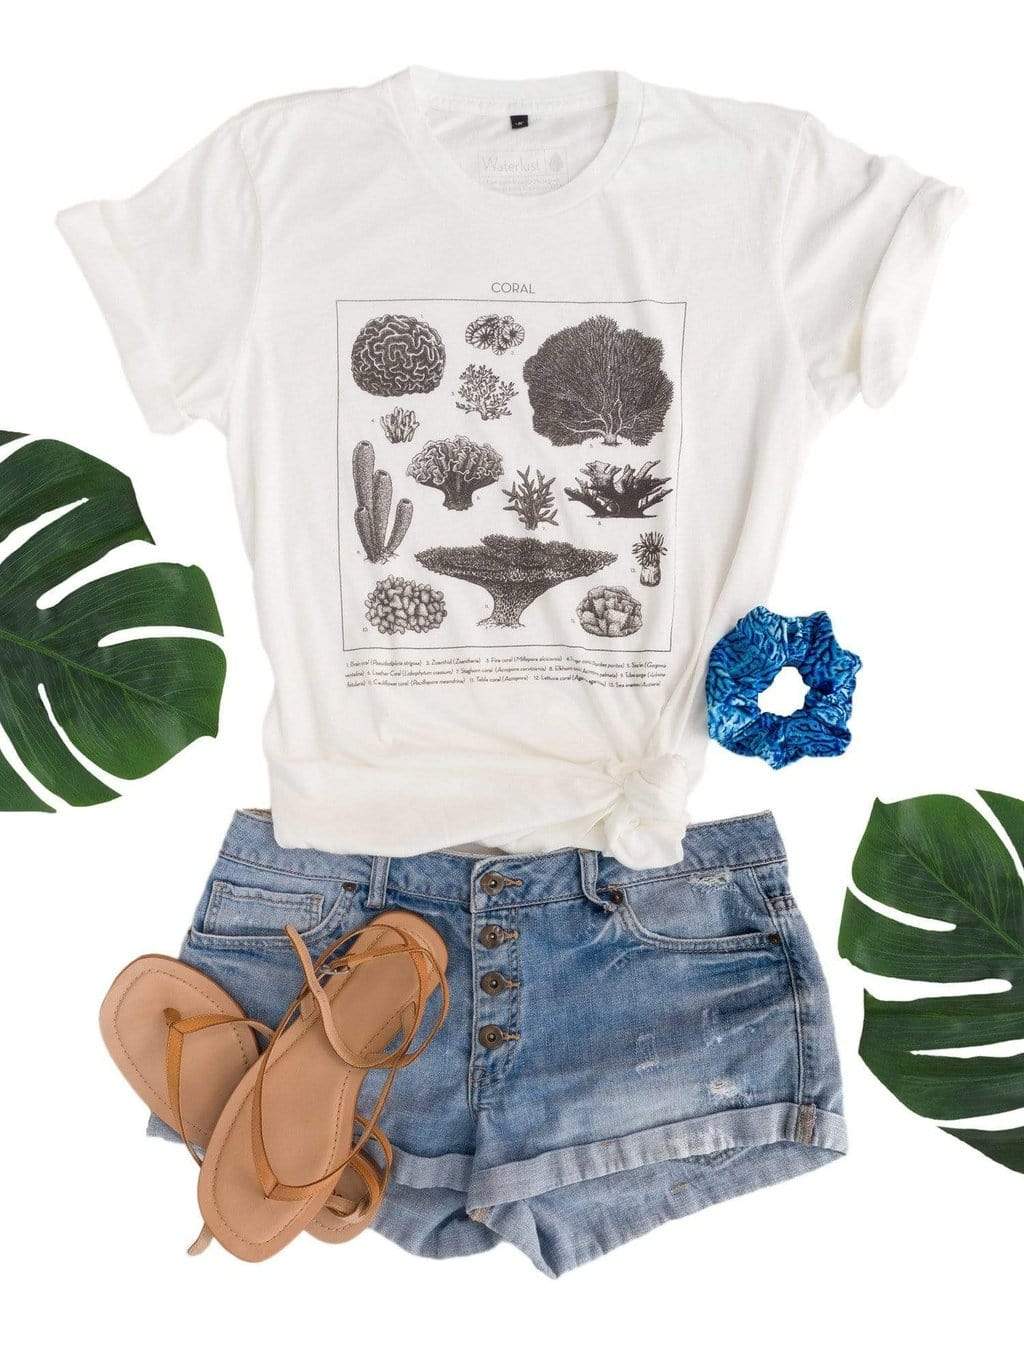 Styled view of the shirt flat with denim shorts, sandals, a scrunchie and monsterra leaves.